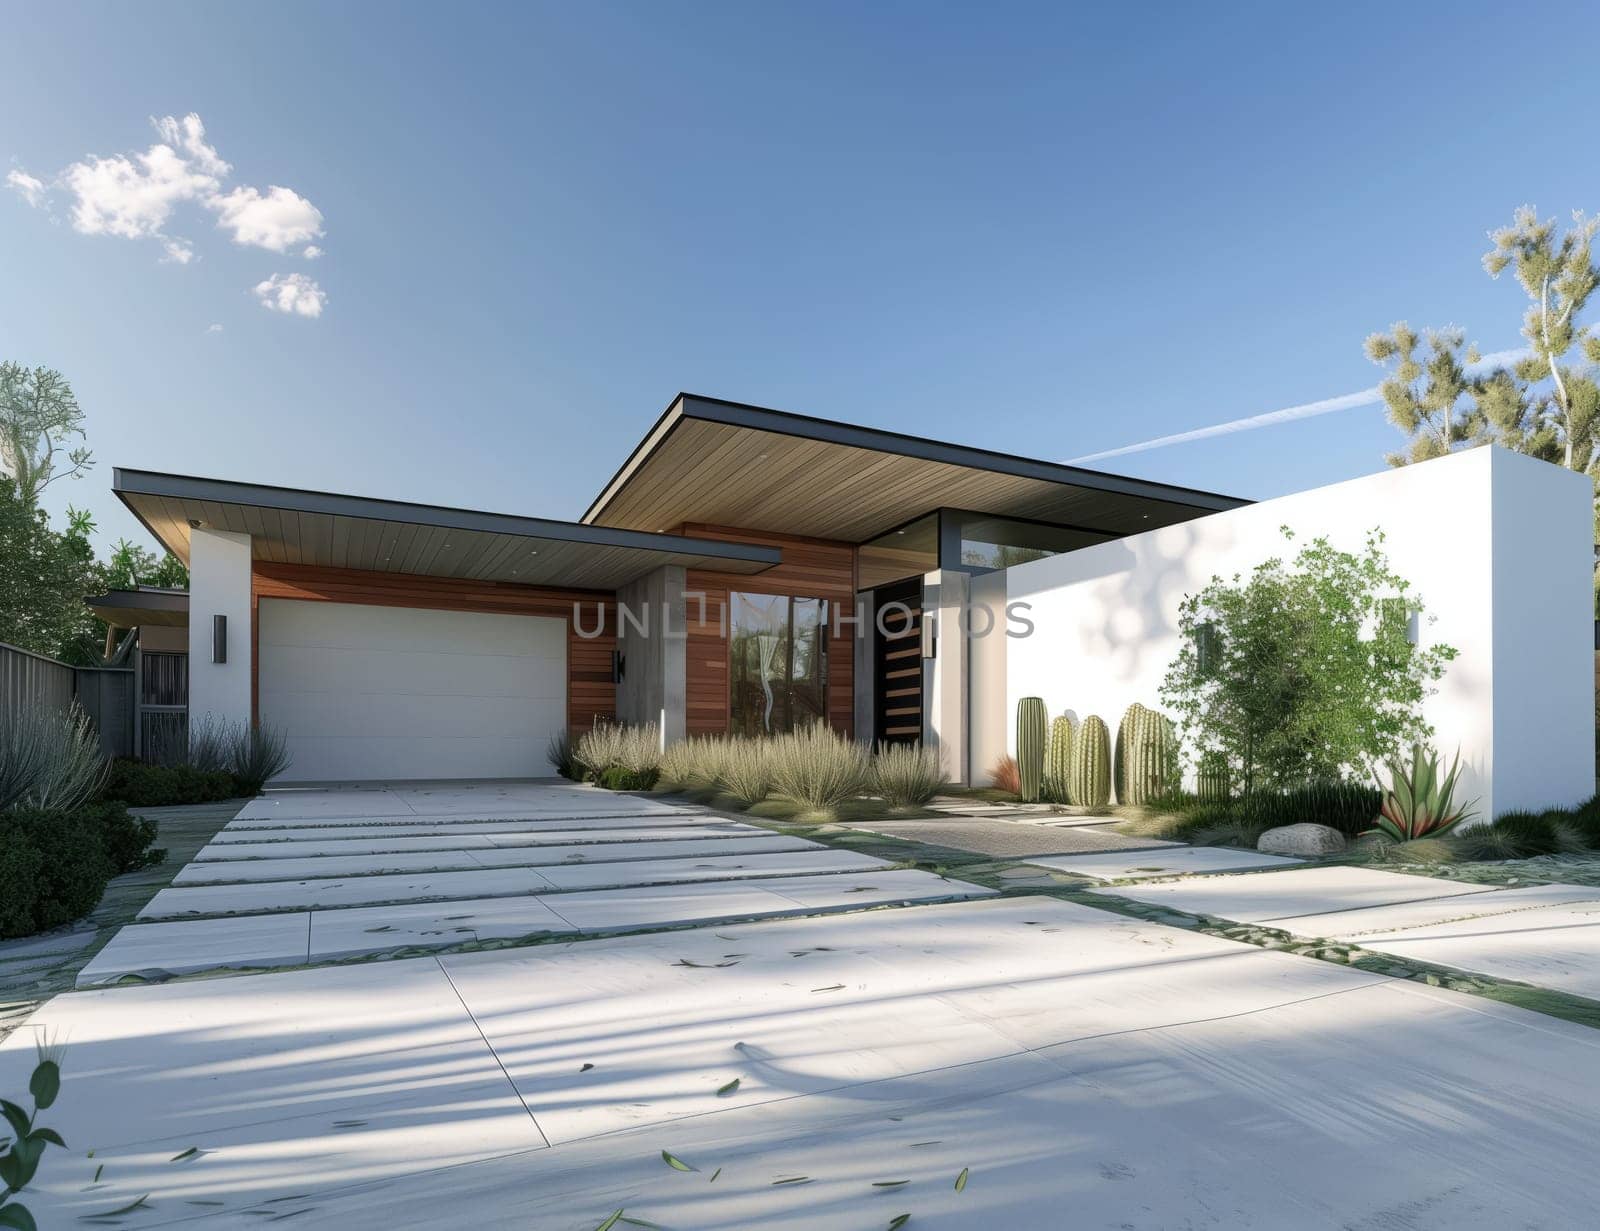 Modern house with driveway, plant fixtures, and asphalt leading to door by richwolf